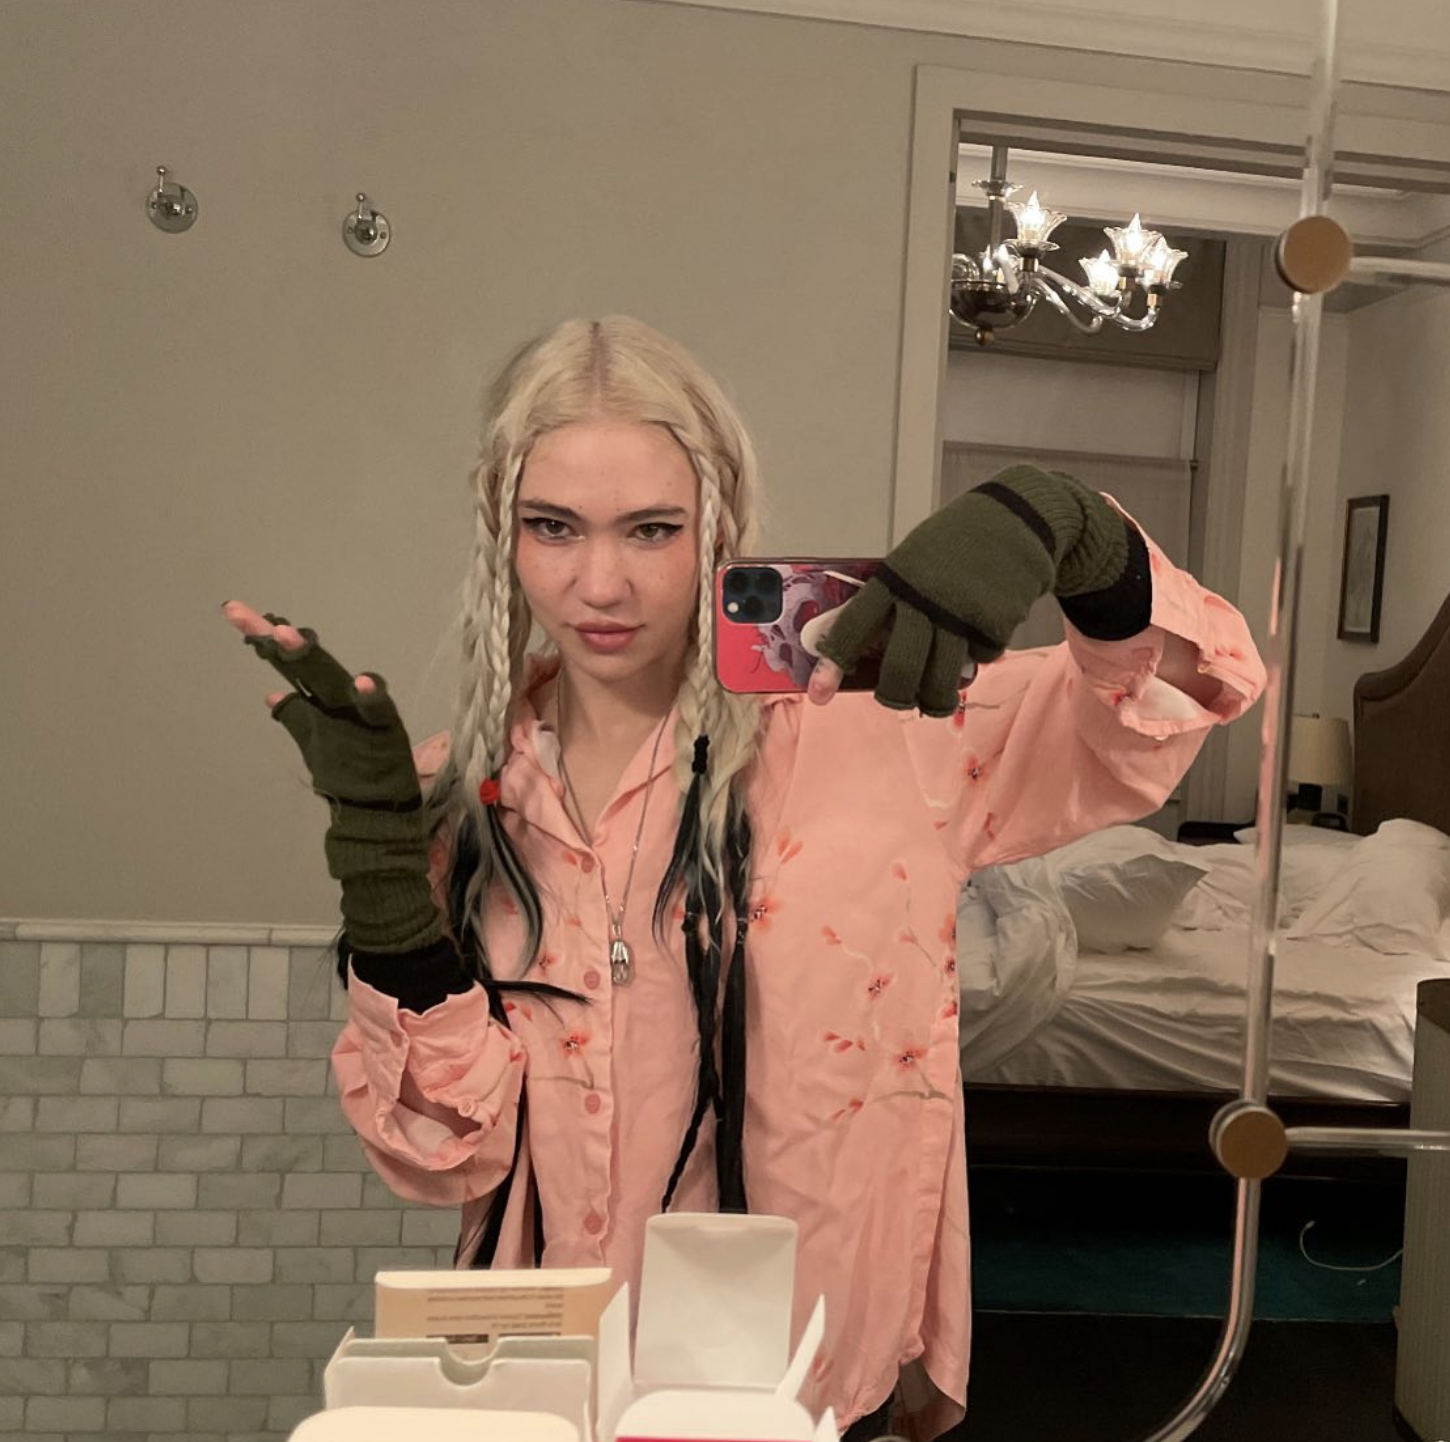 Grimes Changes Her and Elon Musk’s Daughter’s Name From Exa Dark Sideræl to a Symbol